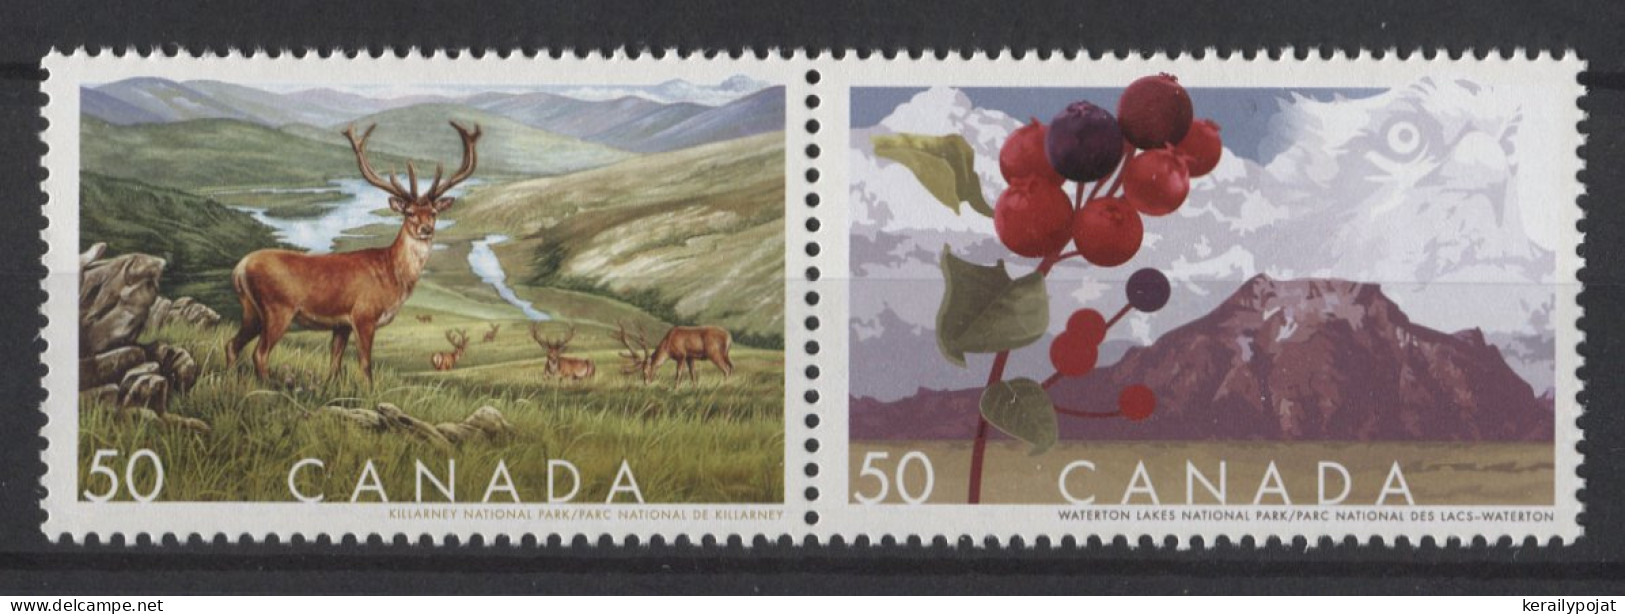 Canada - 2005 National Parks Pair MNH__(TH-24871) - Nuovi